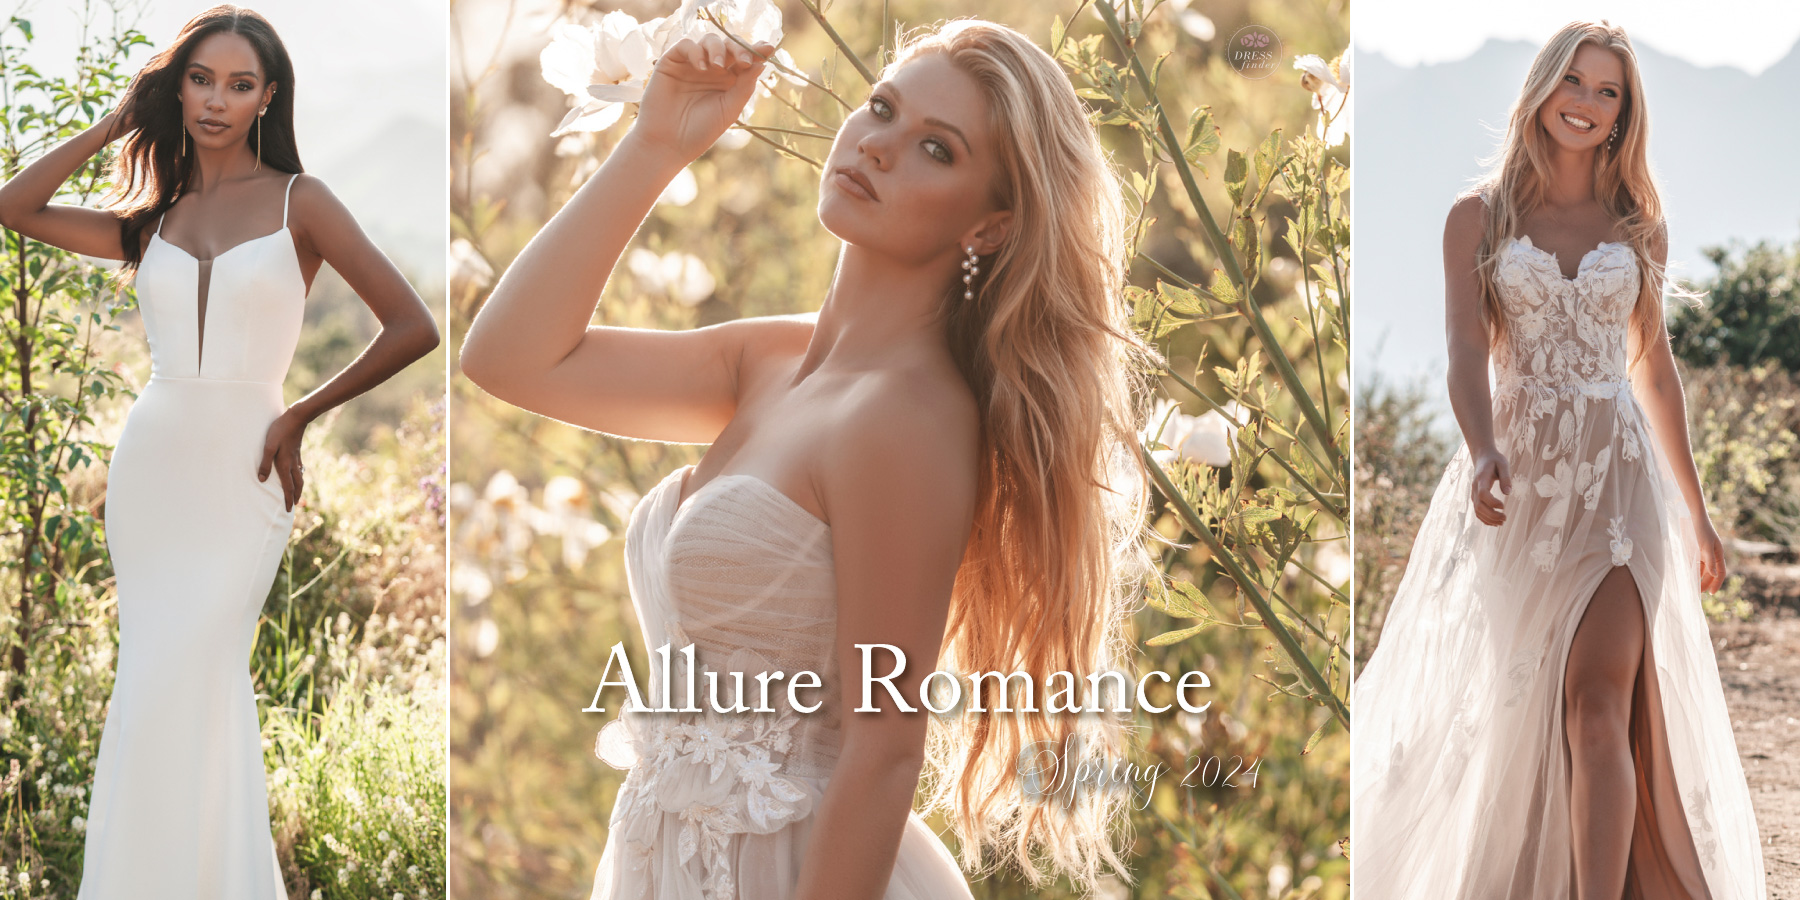 Allure Romance Wedding Dresses in the United States